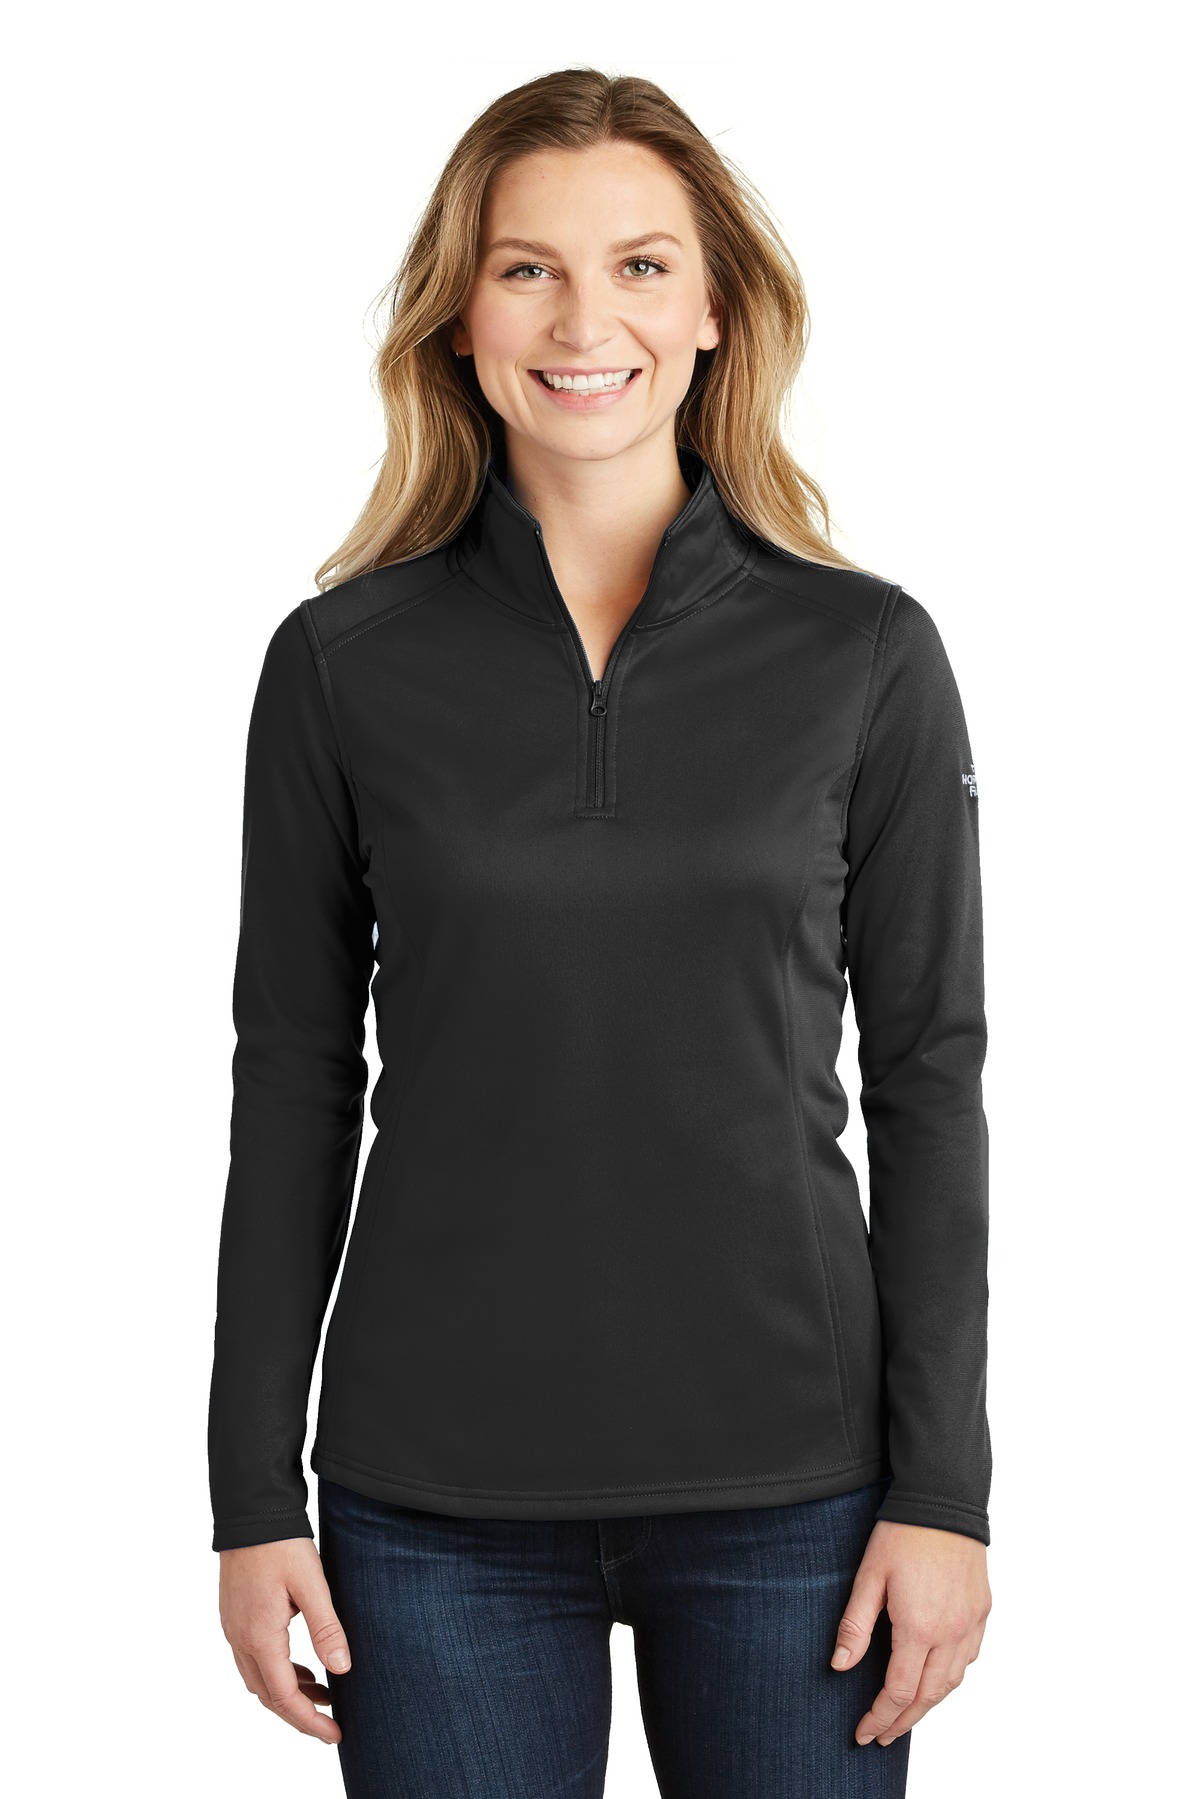 The North Face Ladies Tech 1/4-Zip Fleece-The North Face